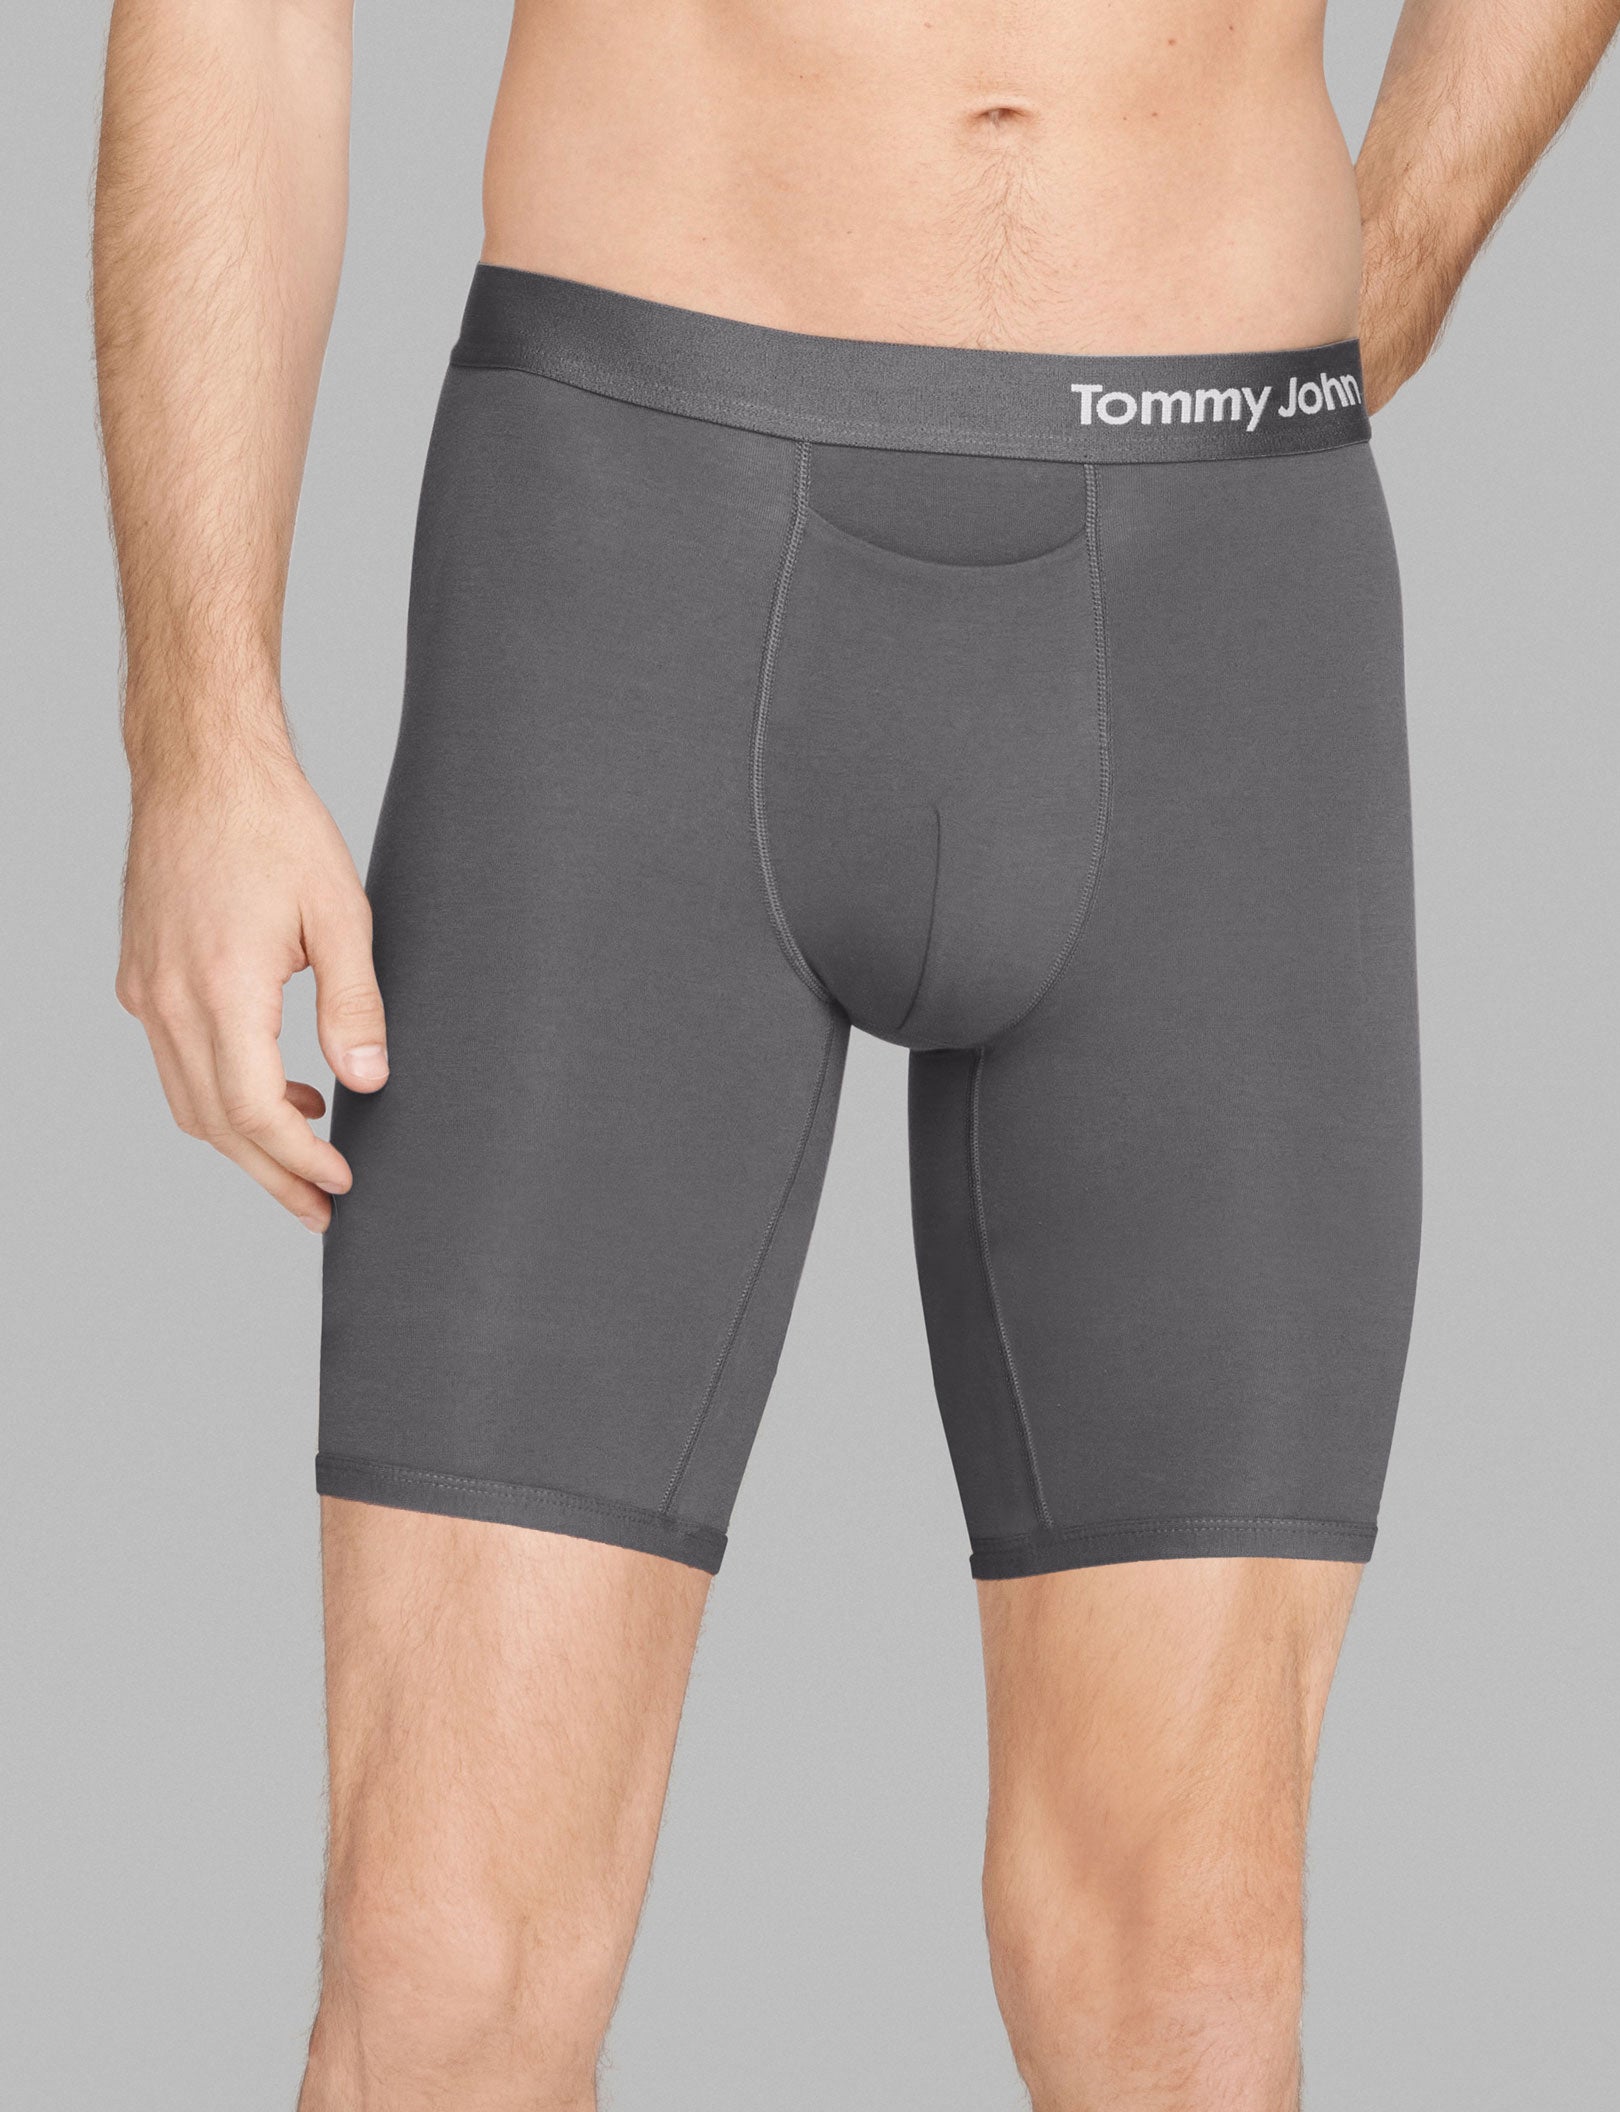 Tommy John Cool Cotton Brief 2024